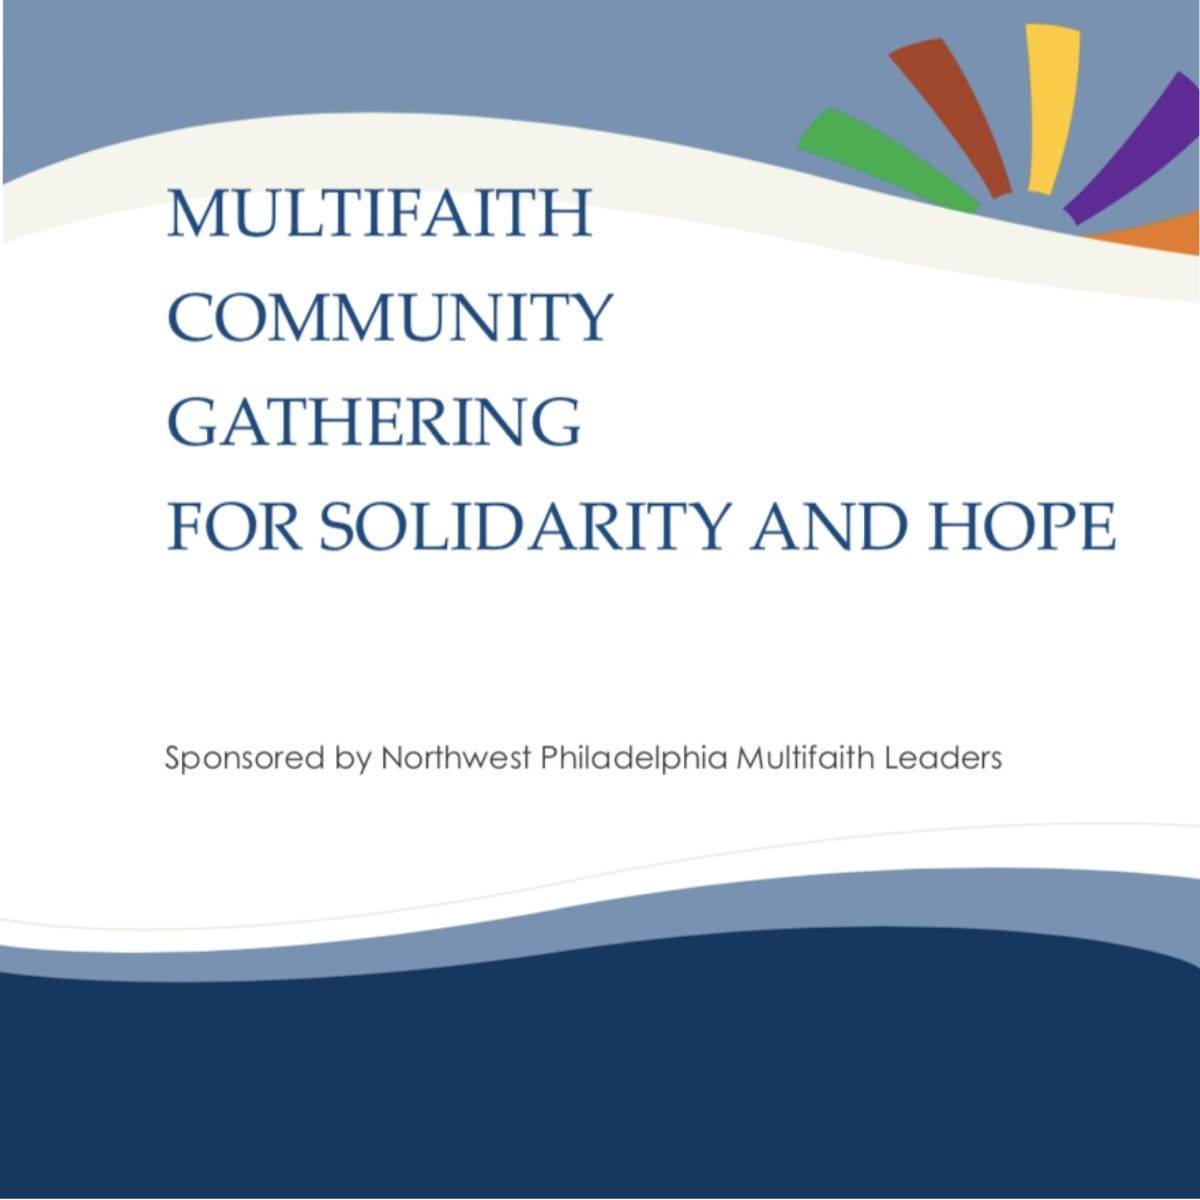 Multifaith Community Gathering for Solidarity and Hope sponsored by NW Multi-faith Leaders